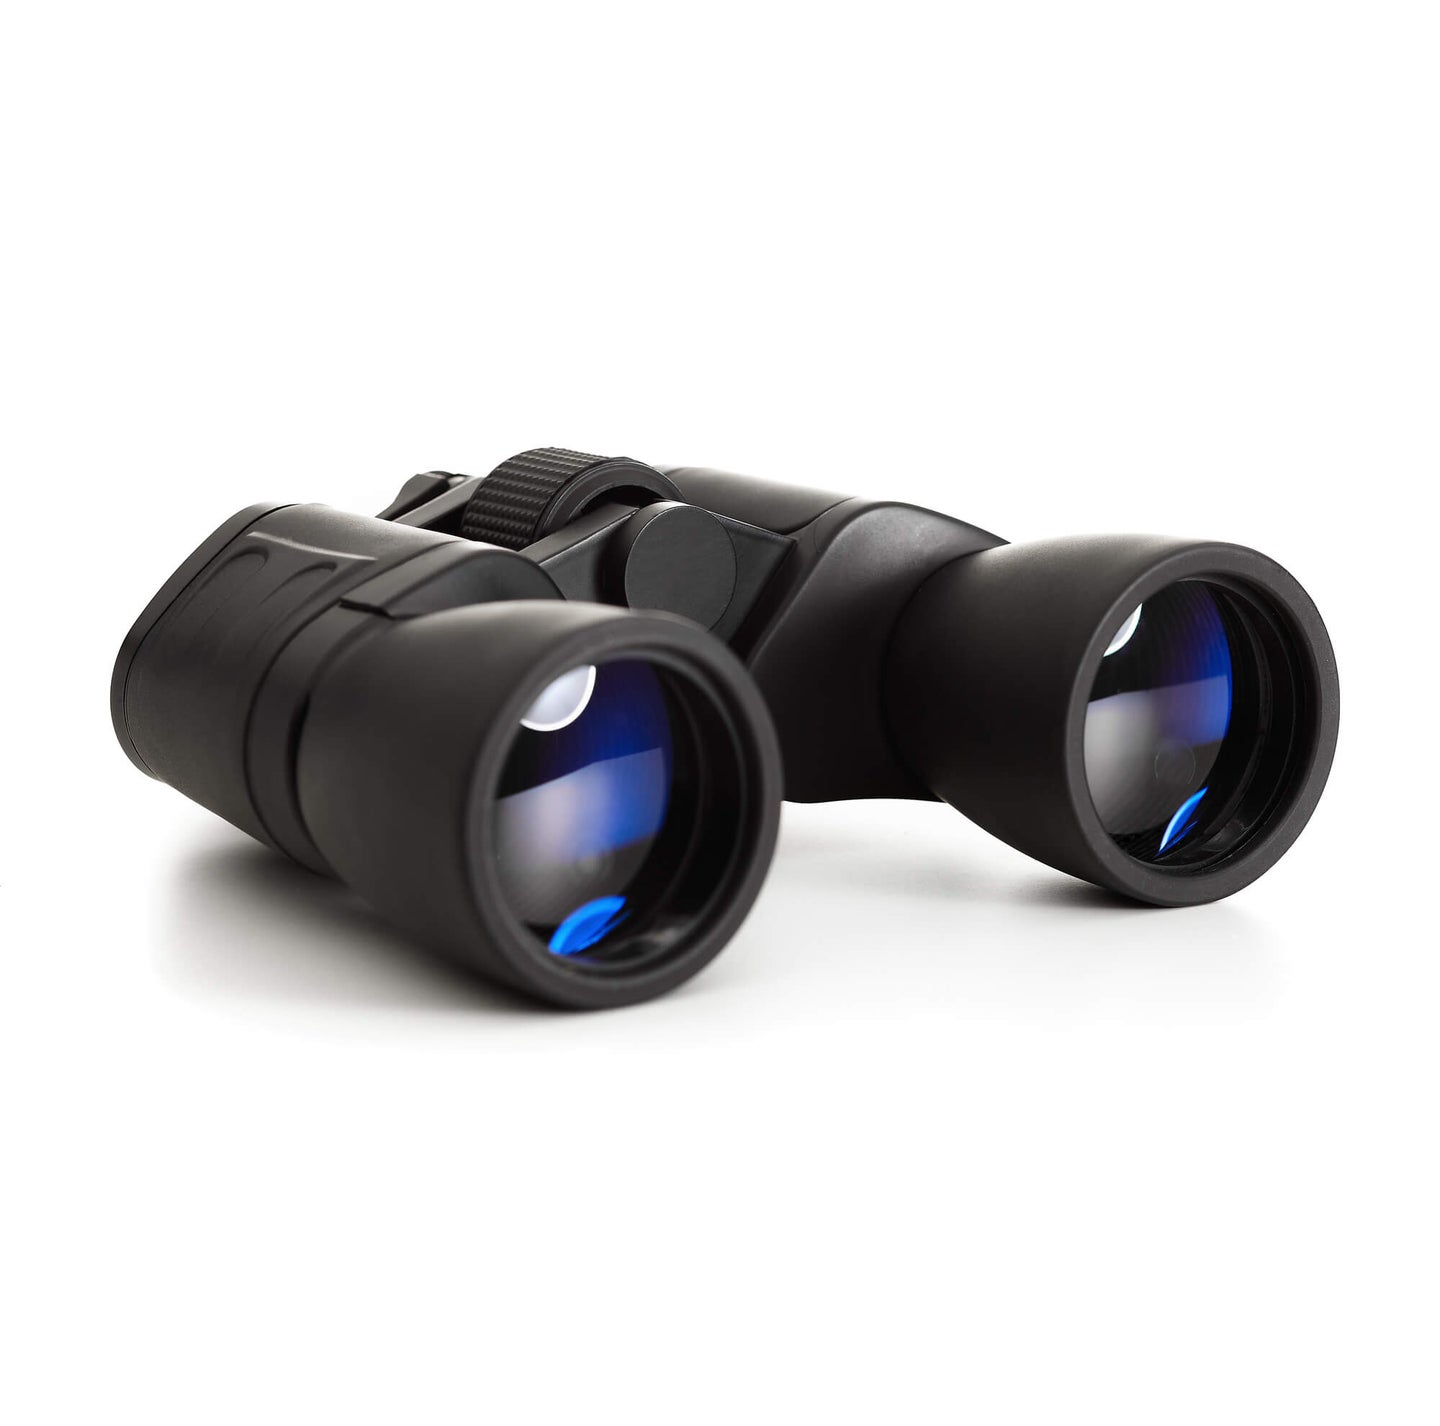 Best 8×32 Binoculars: Quality Optics Small Enough to Fit in Your Pocket